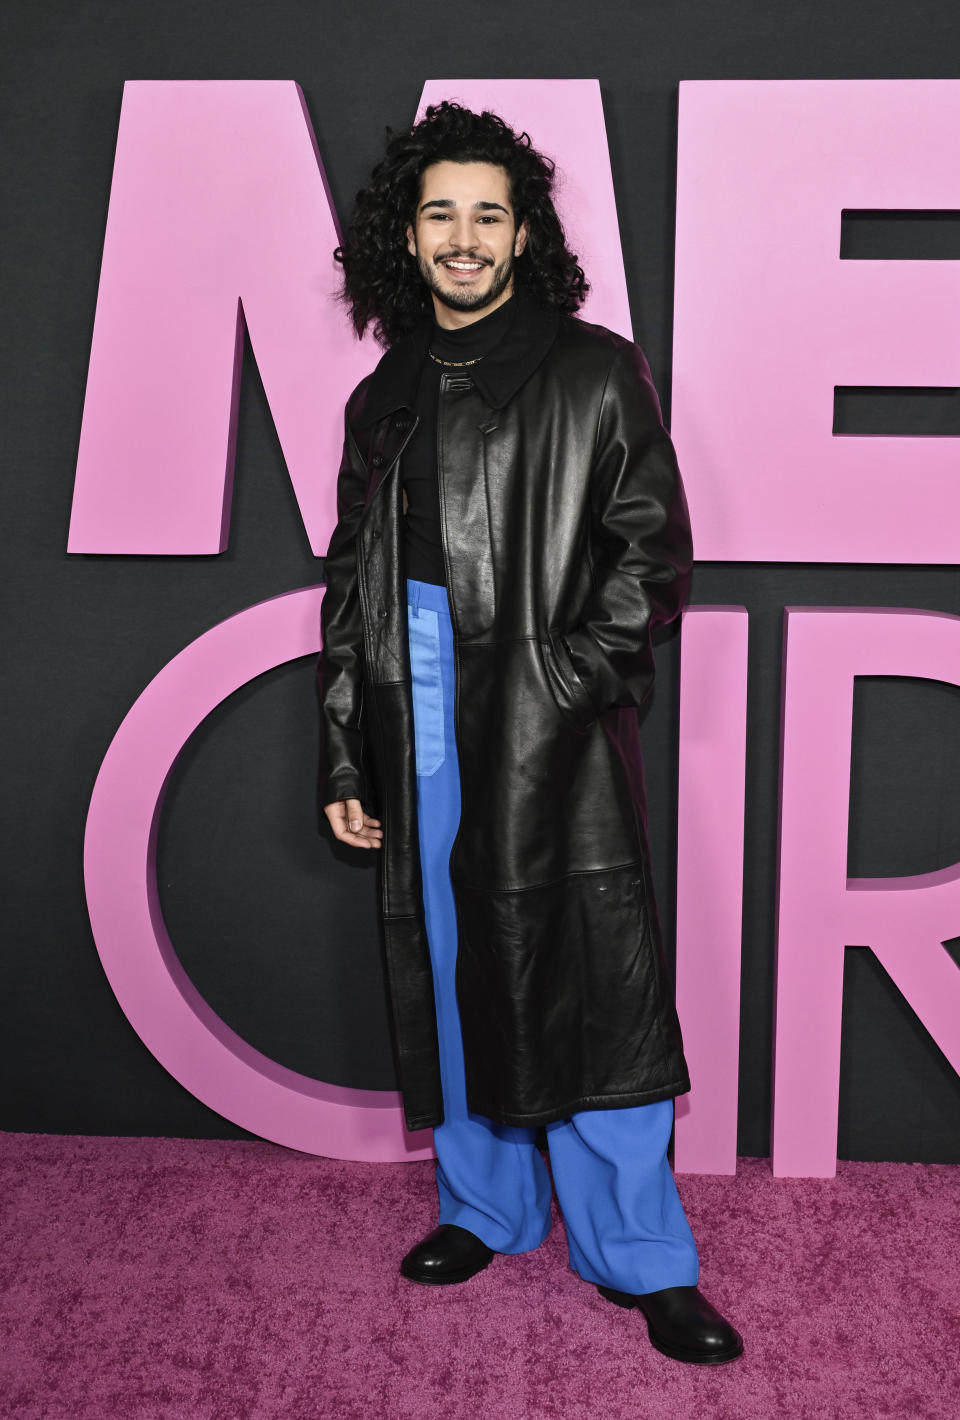 John El-Jor attends the world premiere of "Mean Girls" at AMC Lincoln Square on Monday, Jan. 8, 2024, in New York. (Photo by Evan Agostini/Invision/AP)